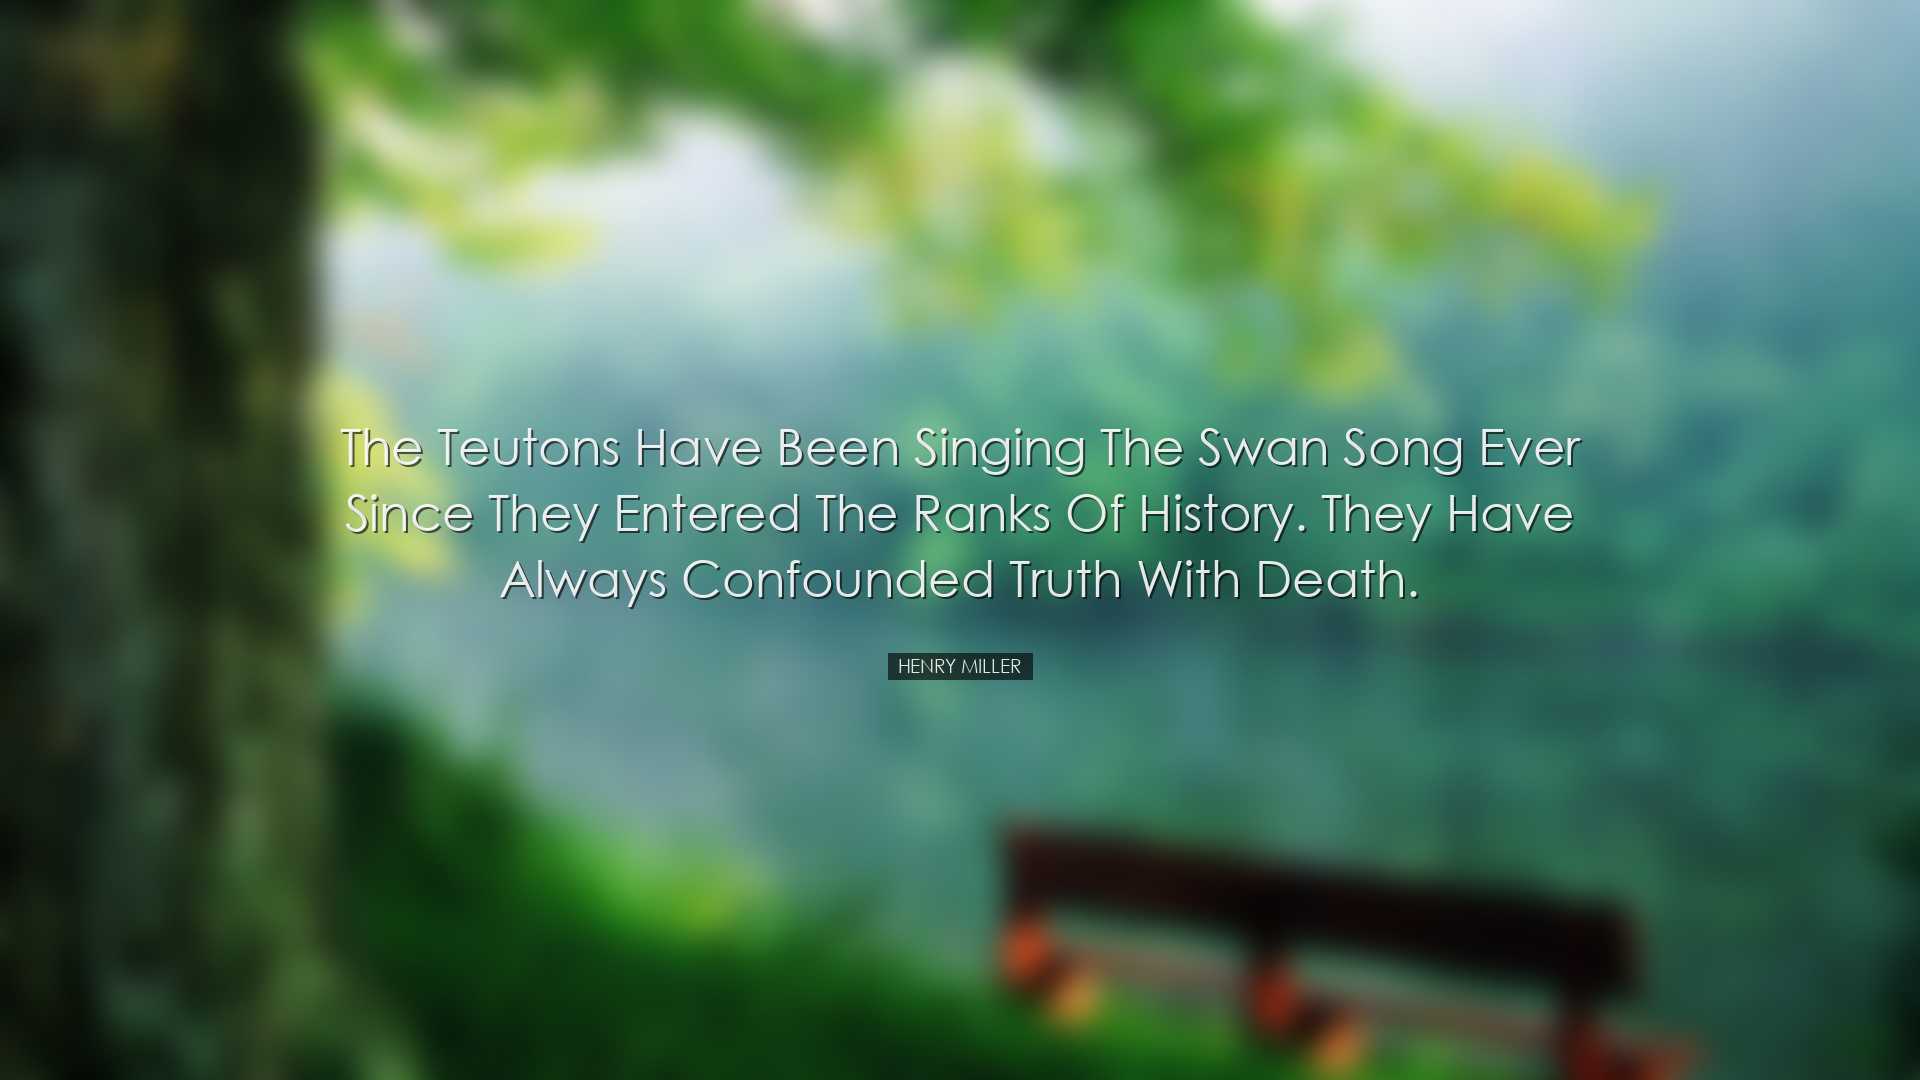 The Teutons have been singing the swan song ever since they entere